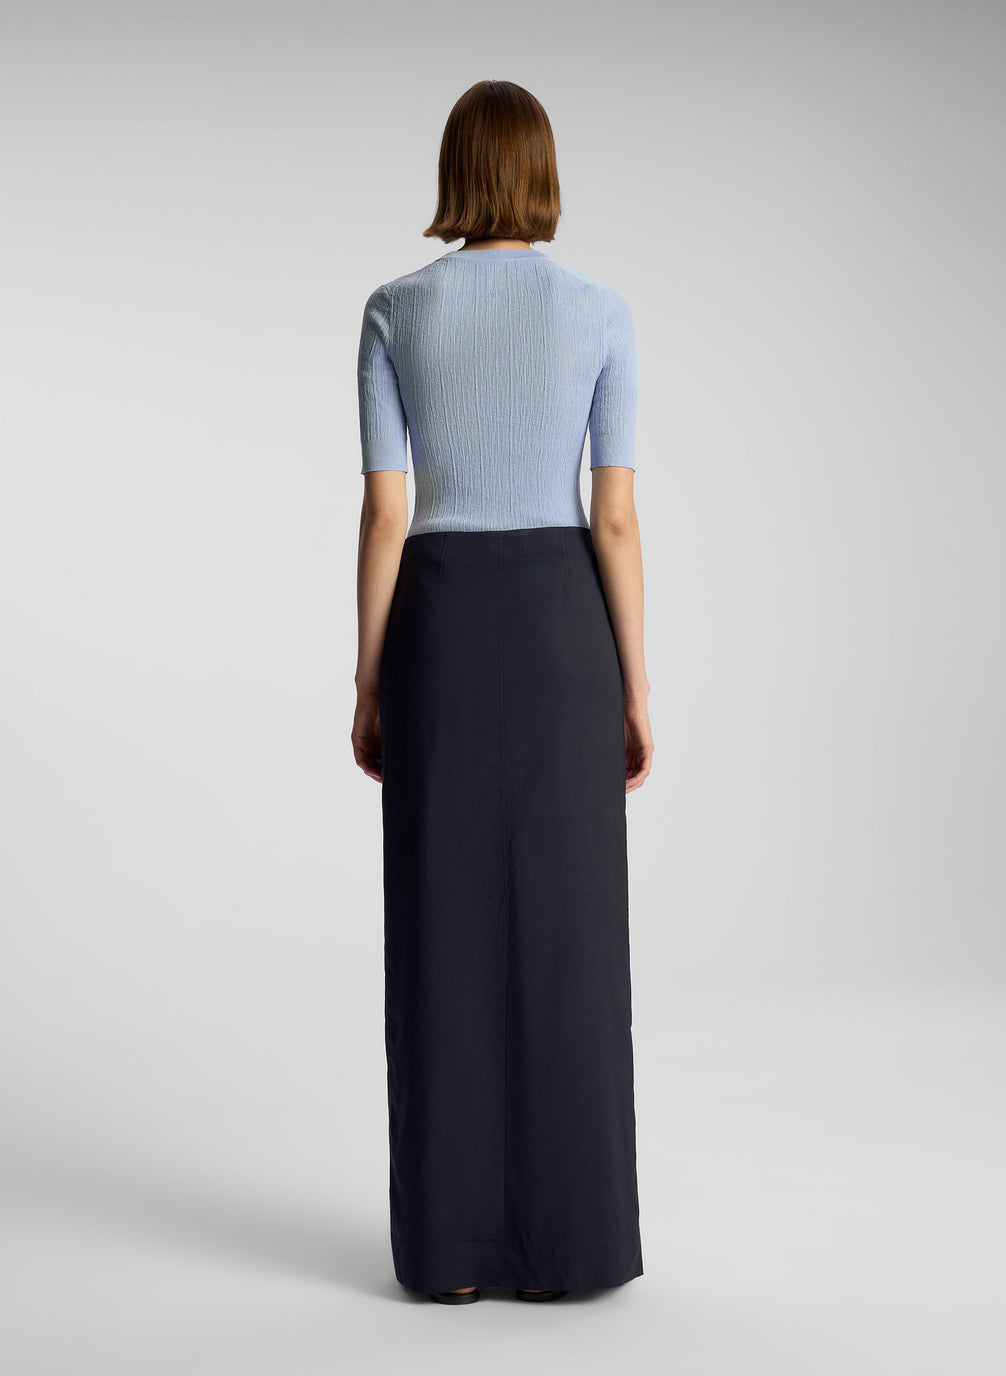 back  view of woman wearing light blue shirt and navy blue maxi skirt